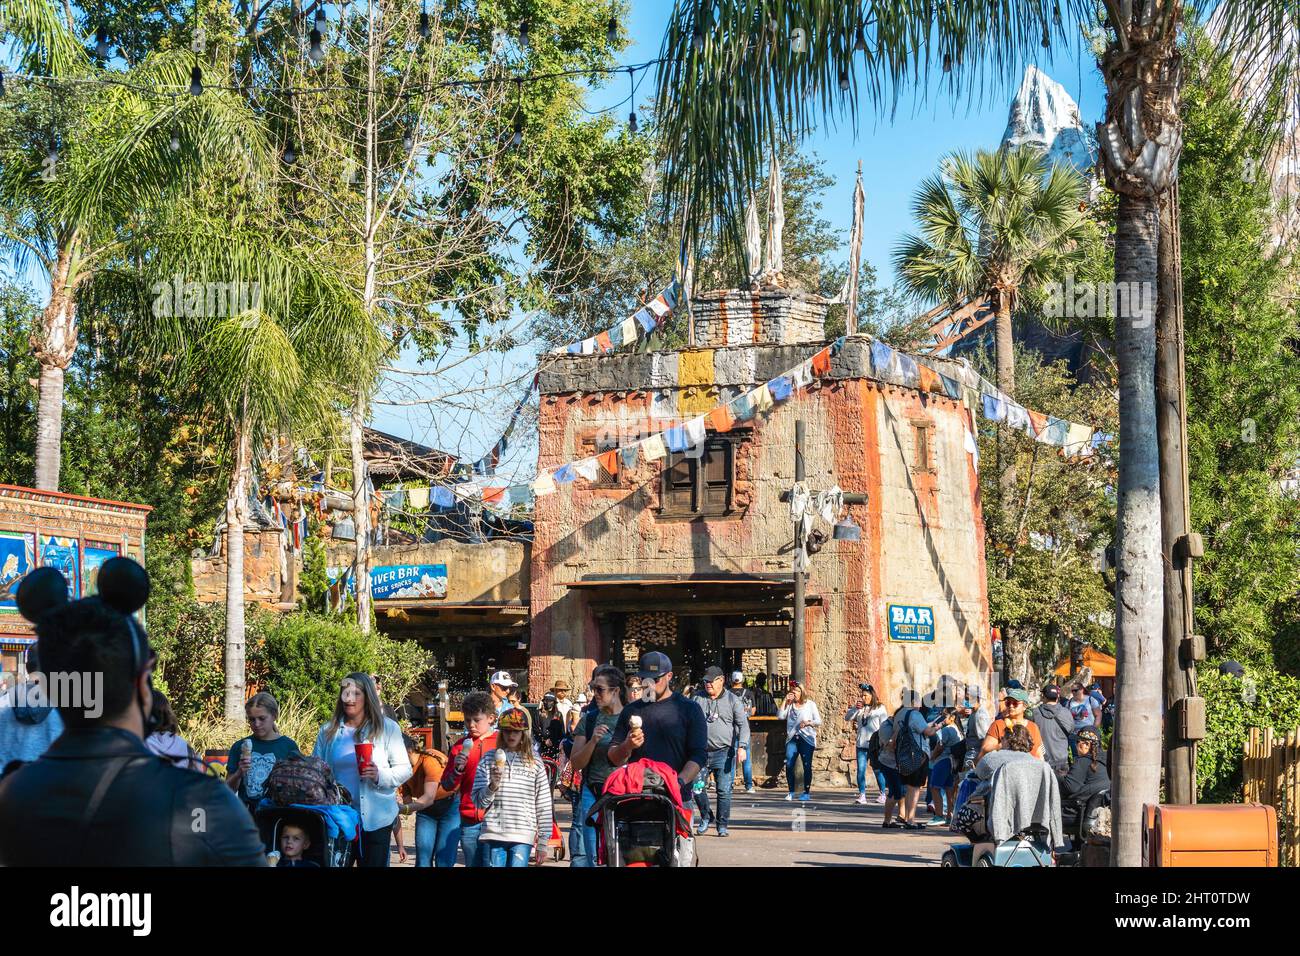 Kissimmee, Florida - February 7, 2022: Closeup View of Thirsty River Bar with Indian Style inside Asia of Disney World Animal Kingdom, Crowd of People Stock Photo